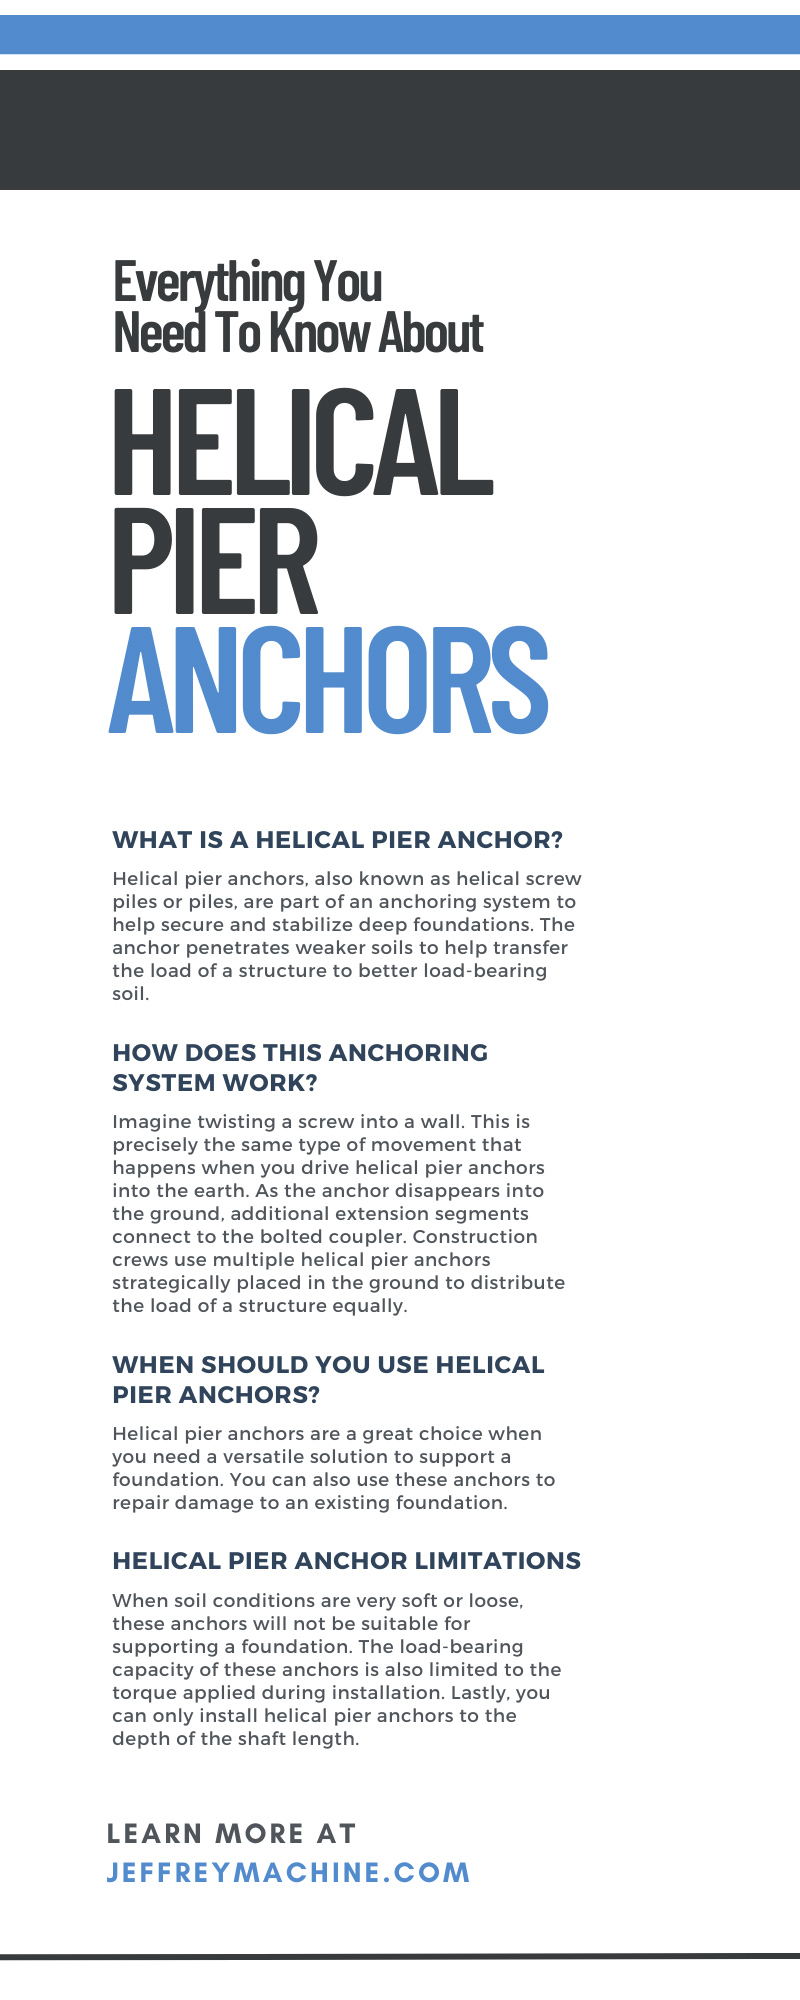 Everything You Need To Know About Helical Pier Anchors
